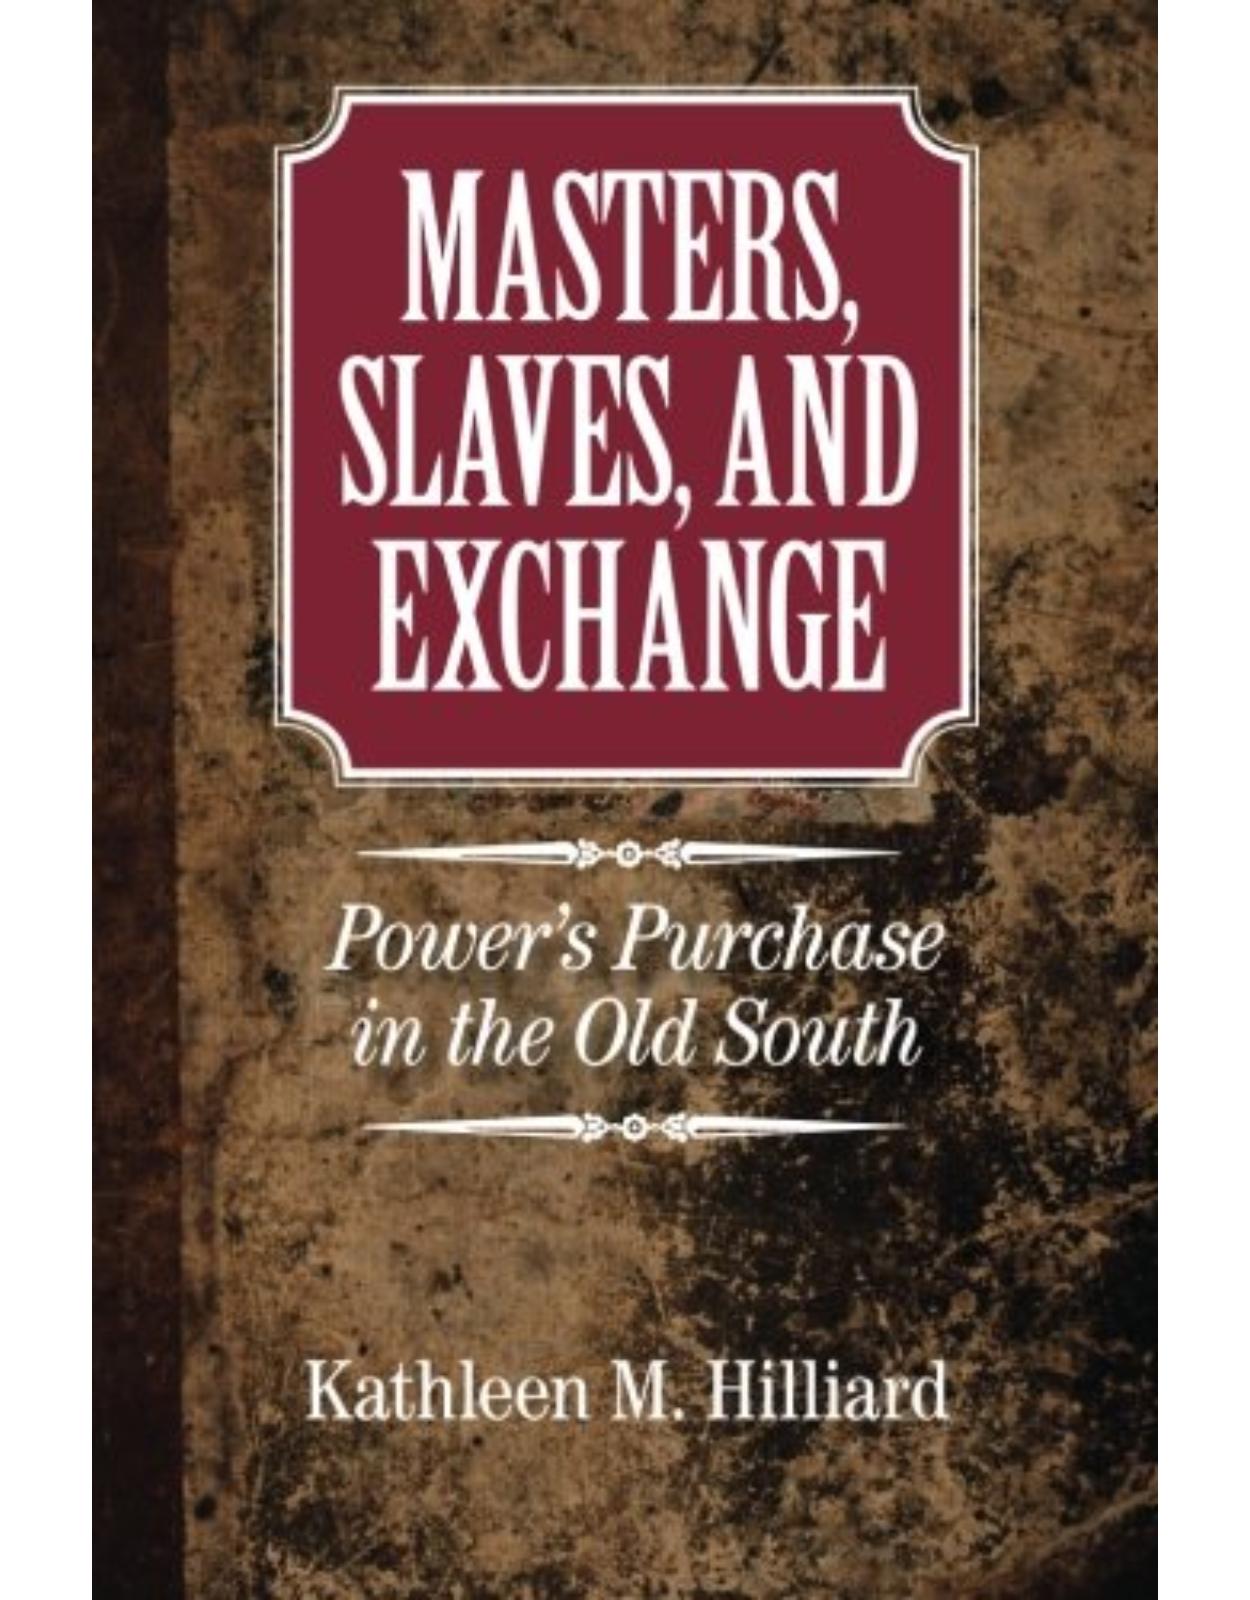 Masters, Slaves, and Exchange: Power's Purchase in the Old South (Cambridge Studies on the American South)